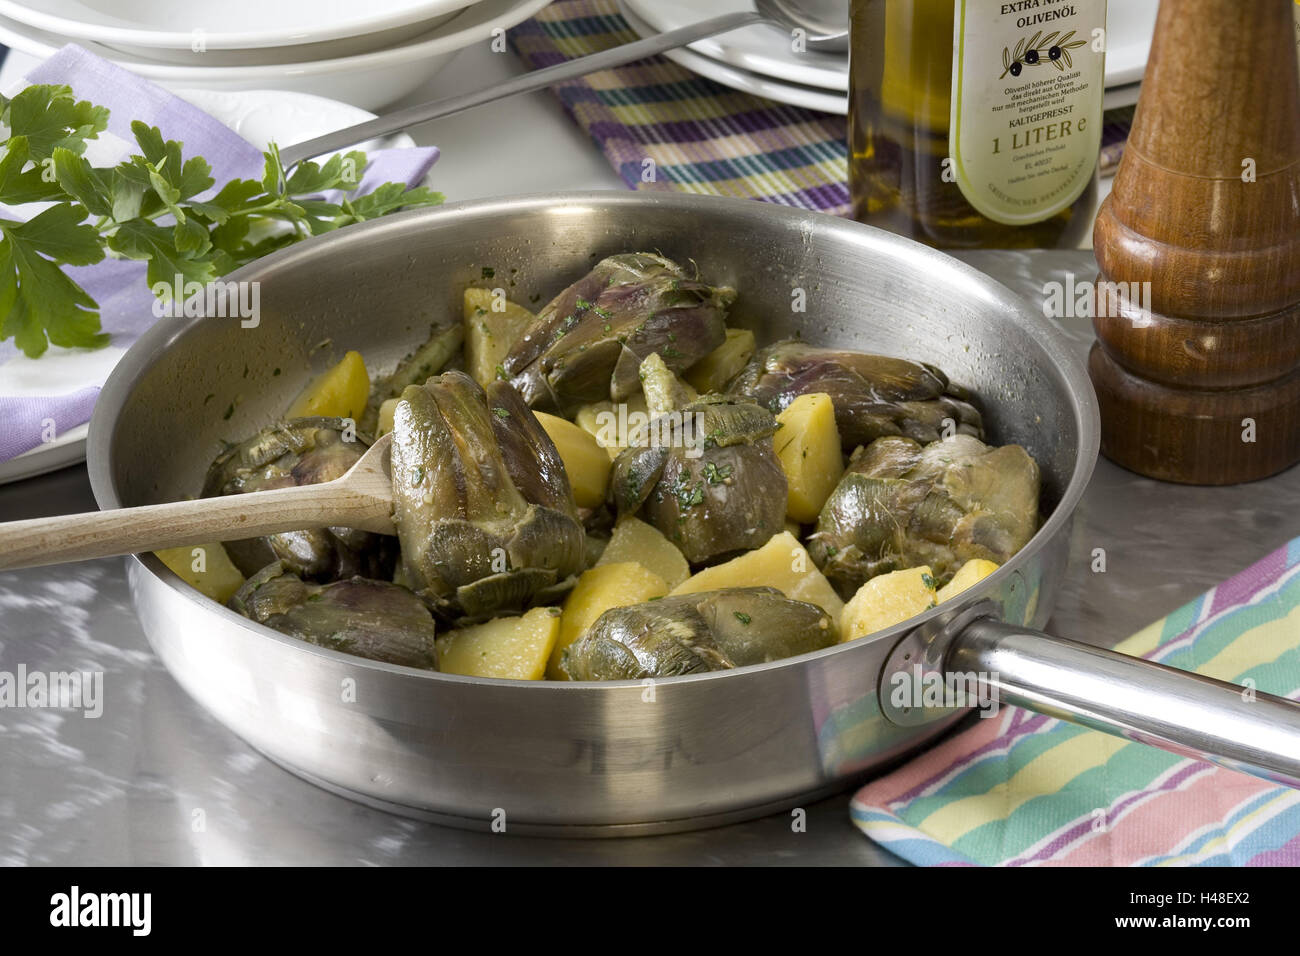 Cooking, pan, Food, artichokes, pan, potatoes, Stilllife, Food, cuisine, preparation, pan, roast, vegetables, pot holder, table set, plate, parsley, ingredients, spices, nutrition, healthy, food, culinary towel, Stock Photo